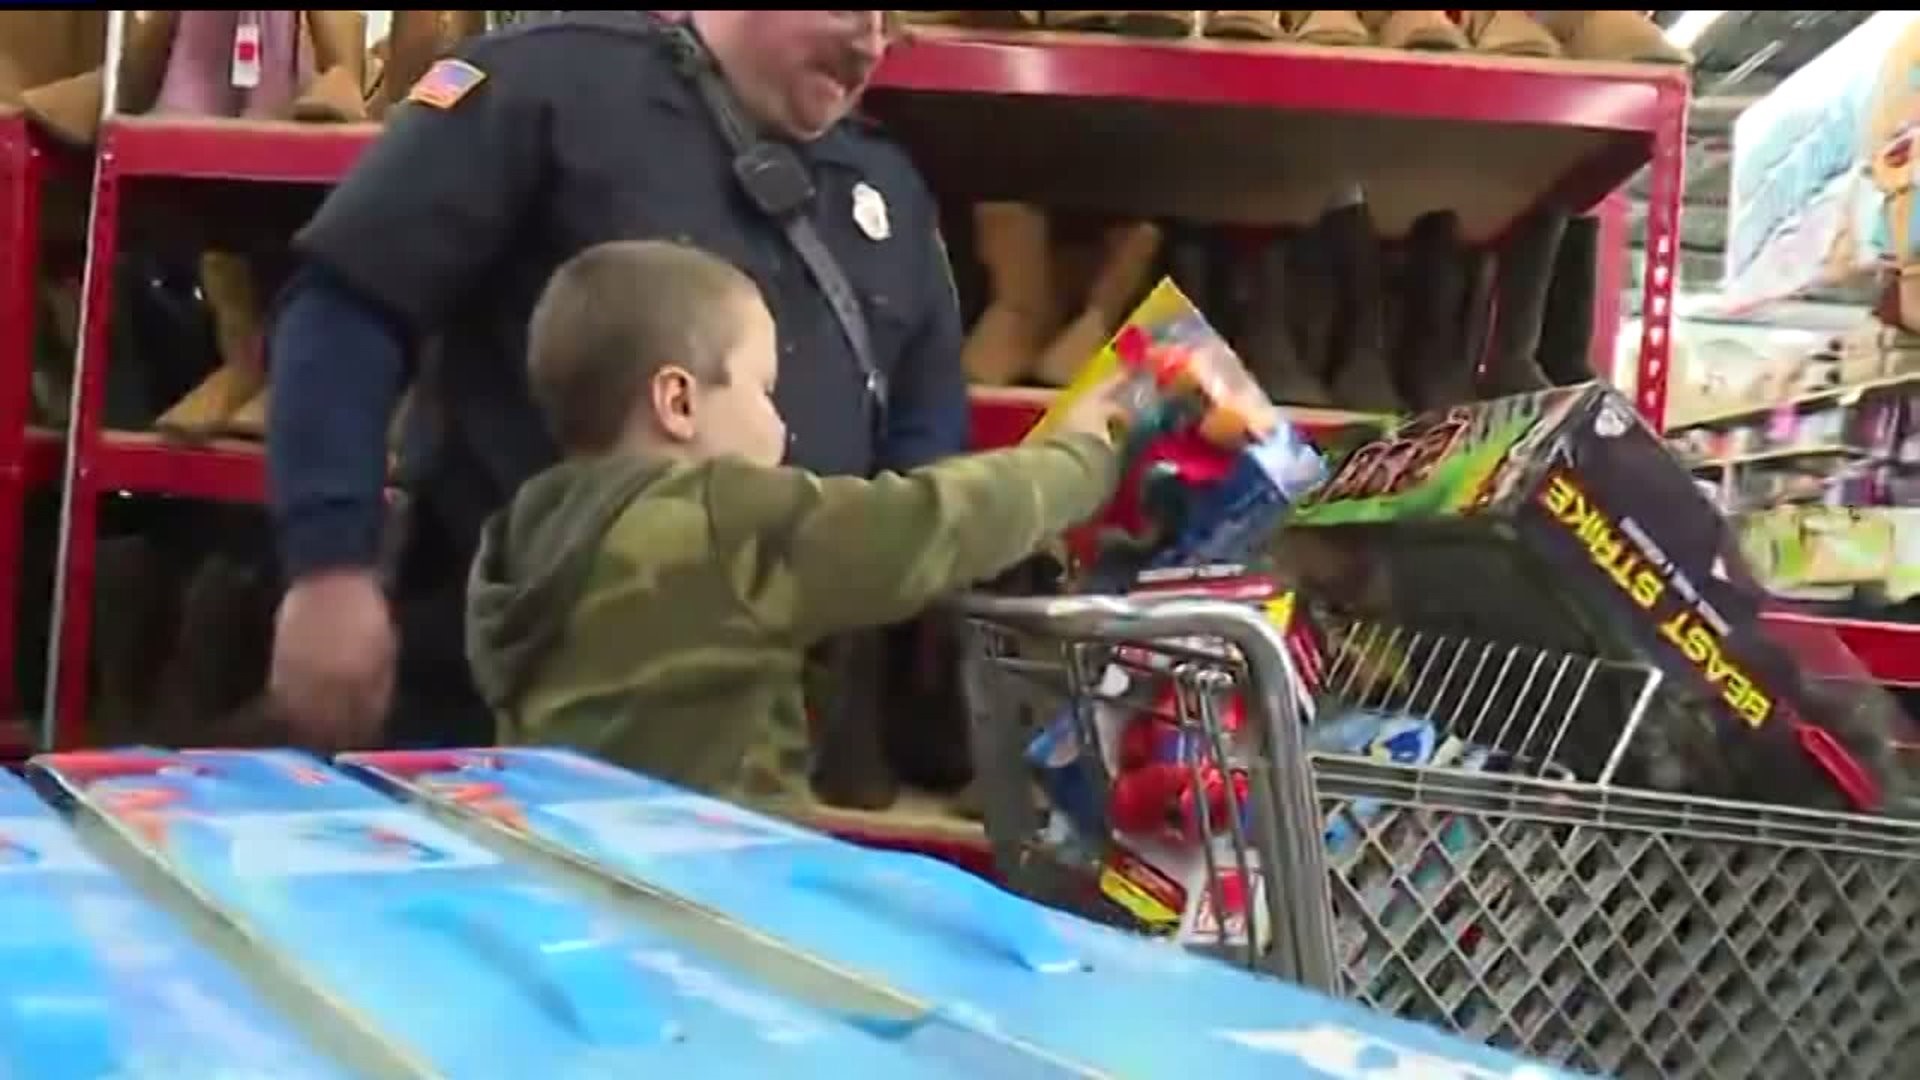 Fire victims treated to shopping spree